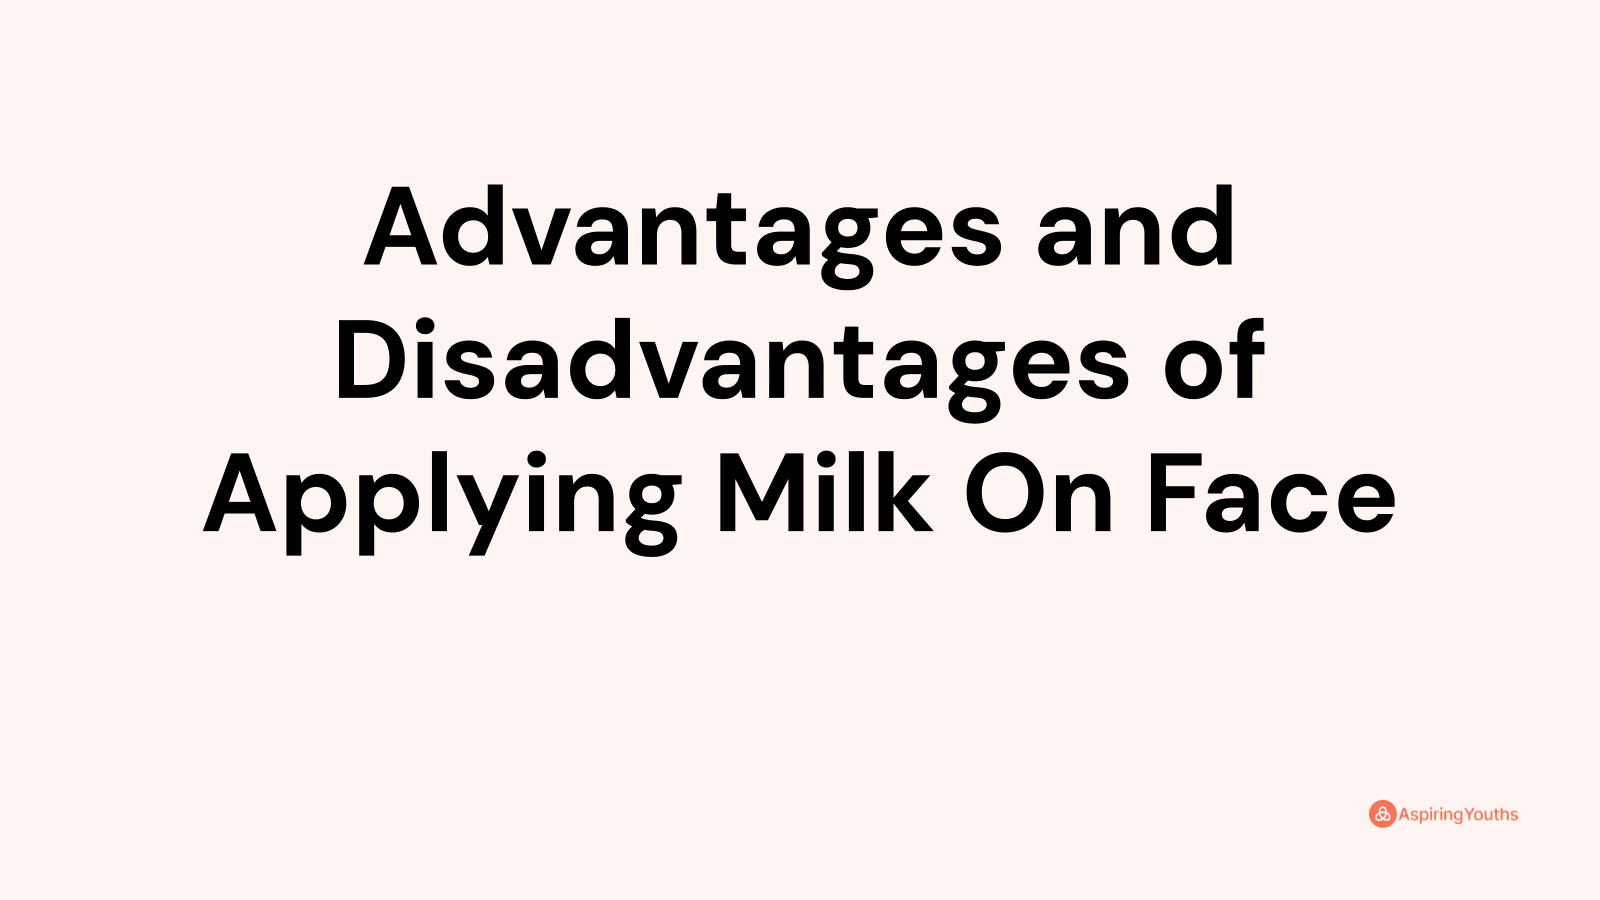 Advantages and disadvantages of Applying Milk On Face